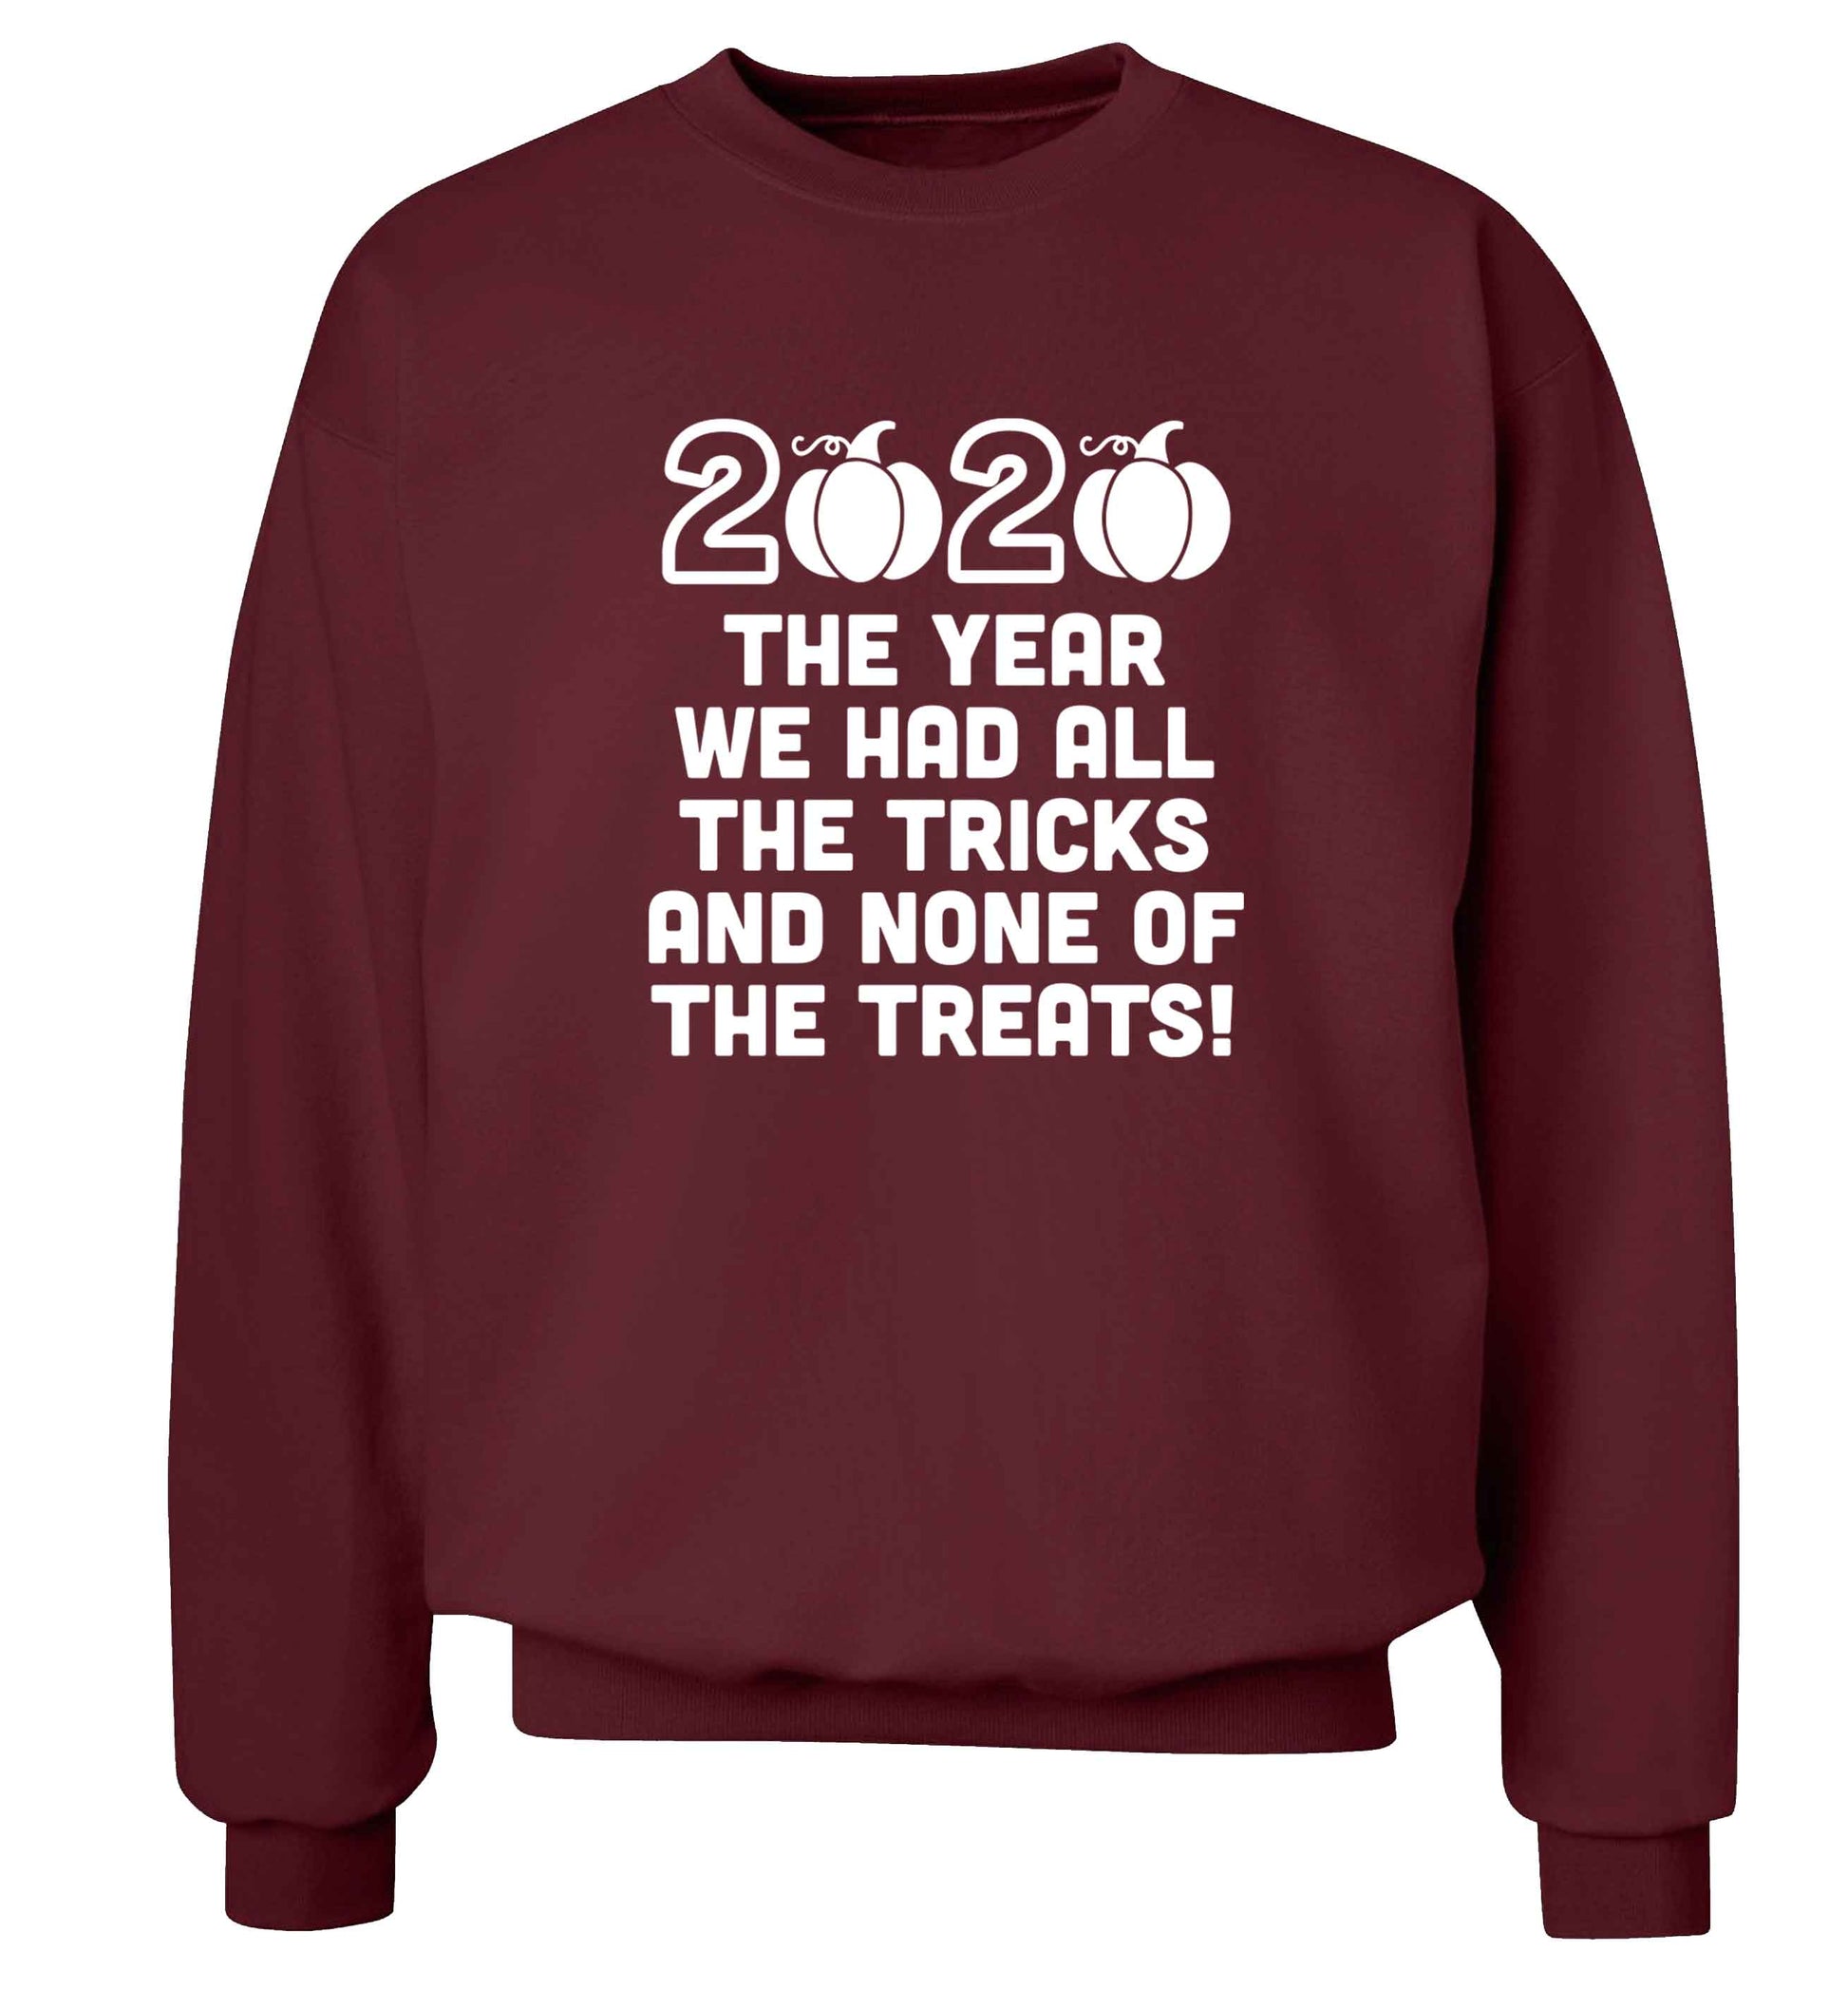 2020 The year we had all of the tricks and none of the treats adult's unisex maroon sweater 2XL